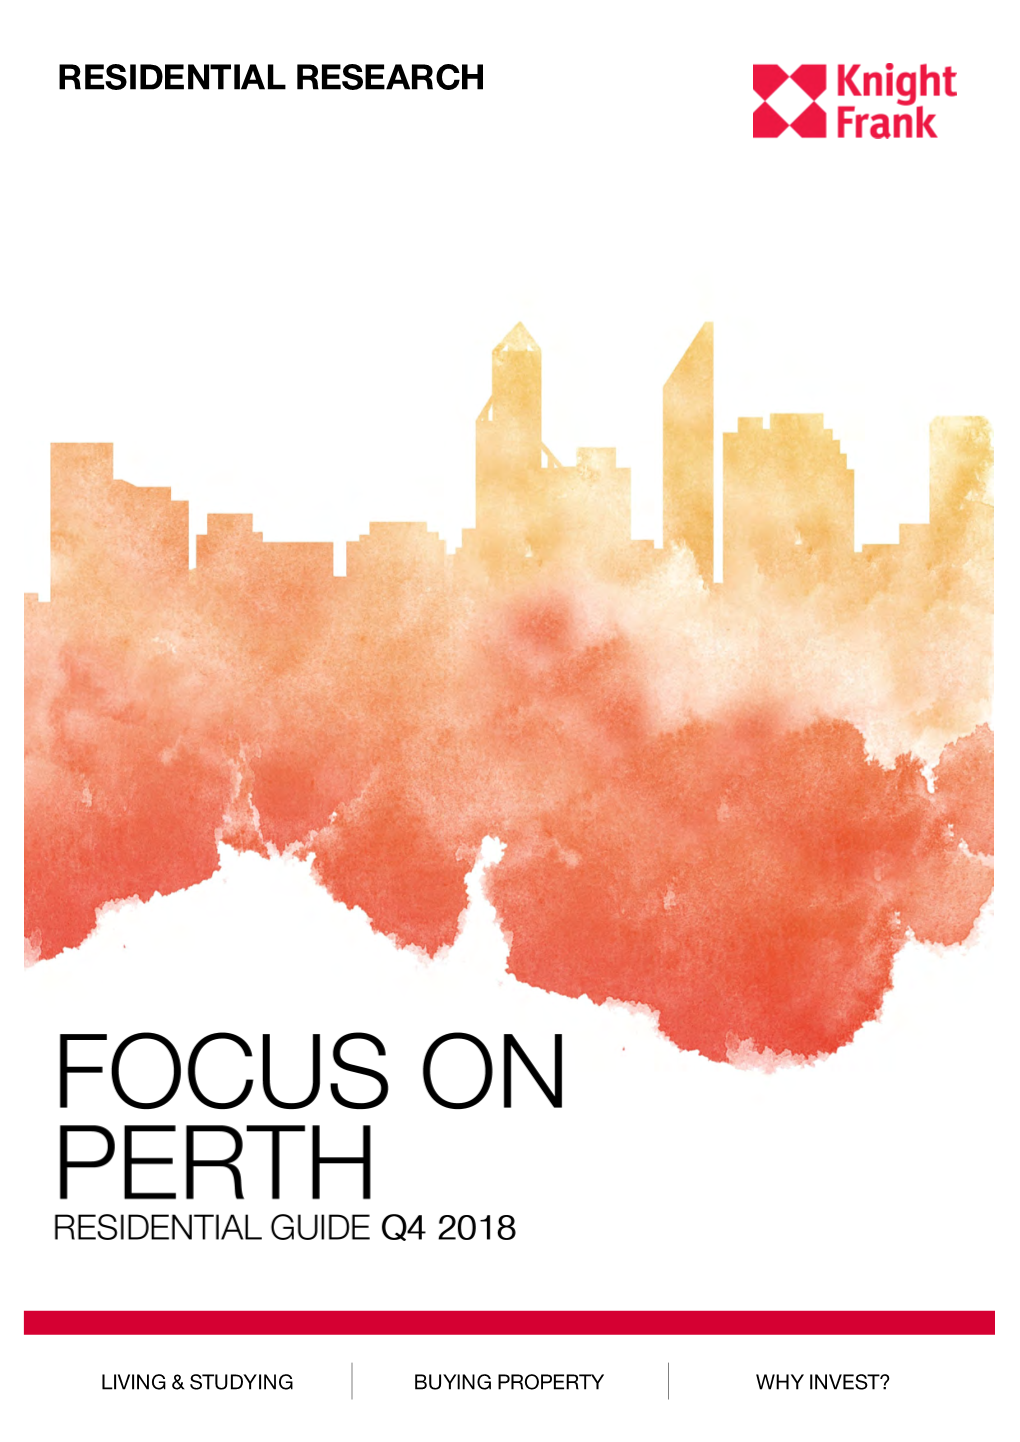 Focus on Perth Perth's Residential Guide 2018 Covers Living